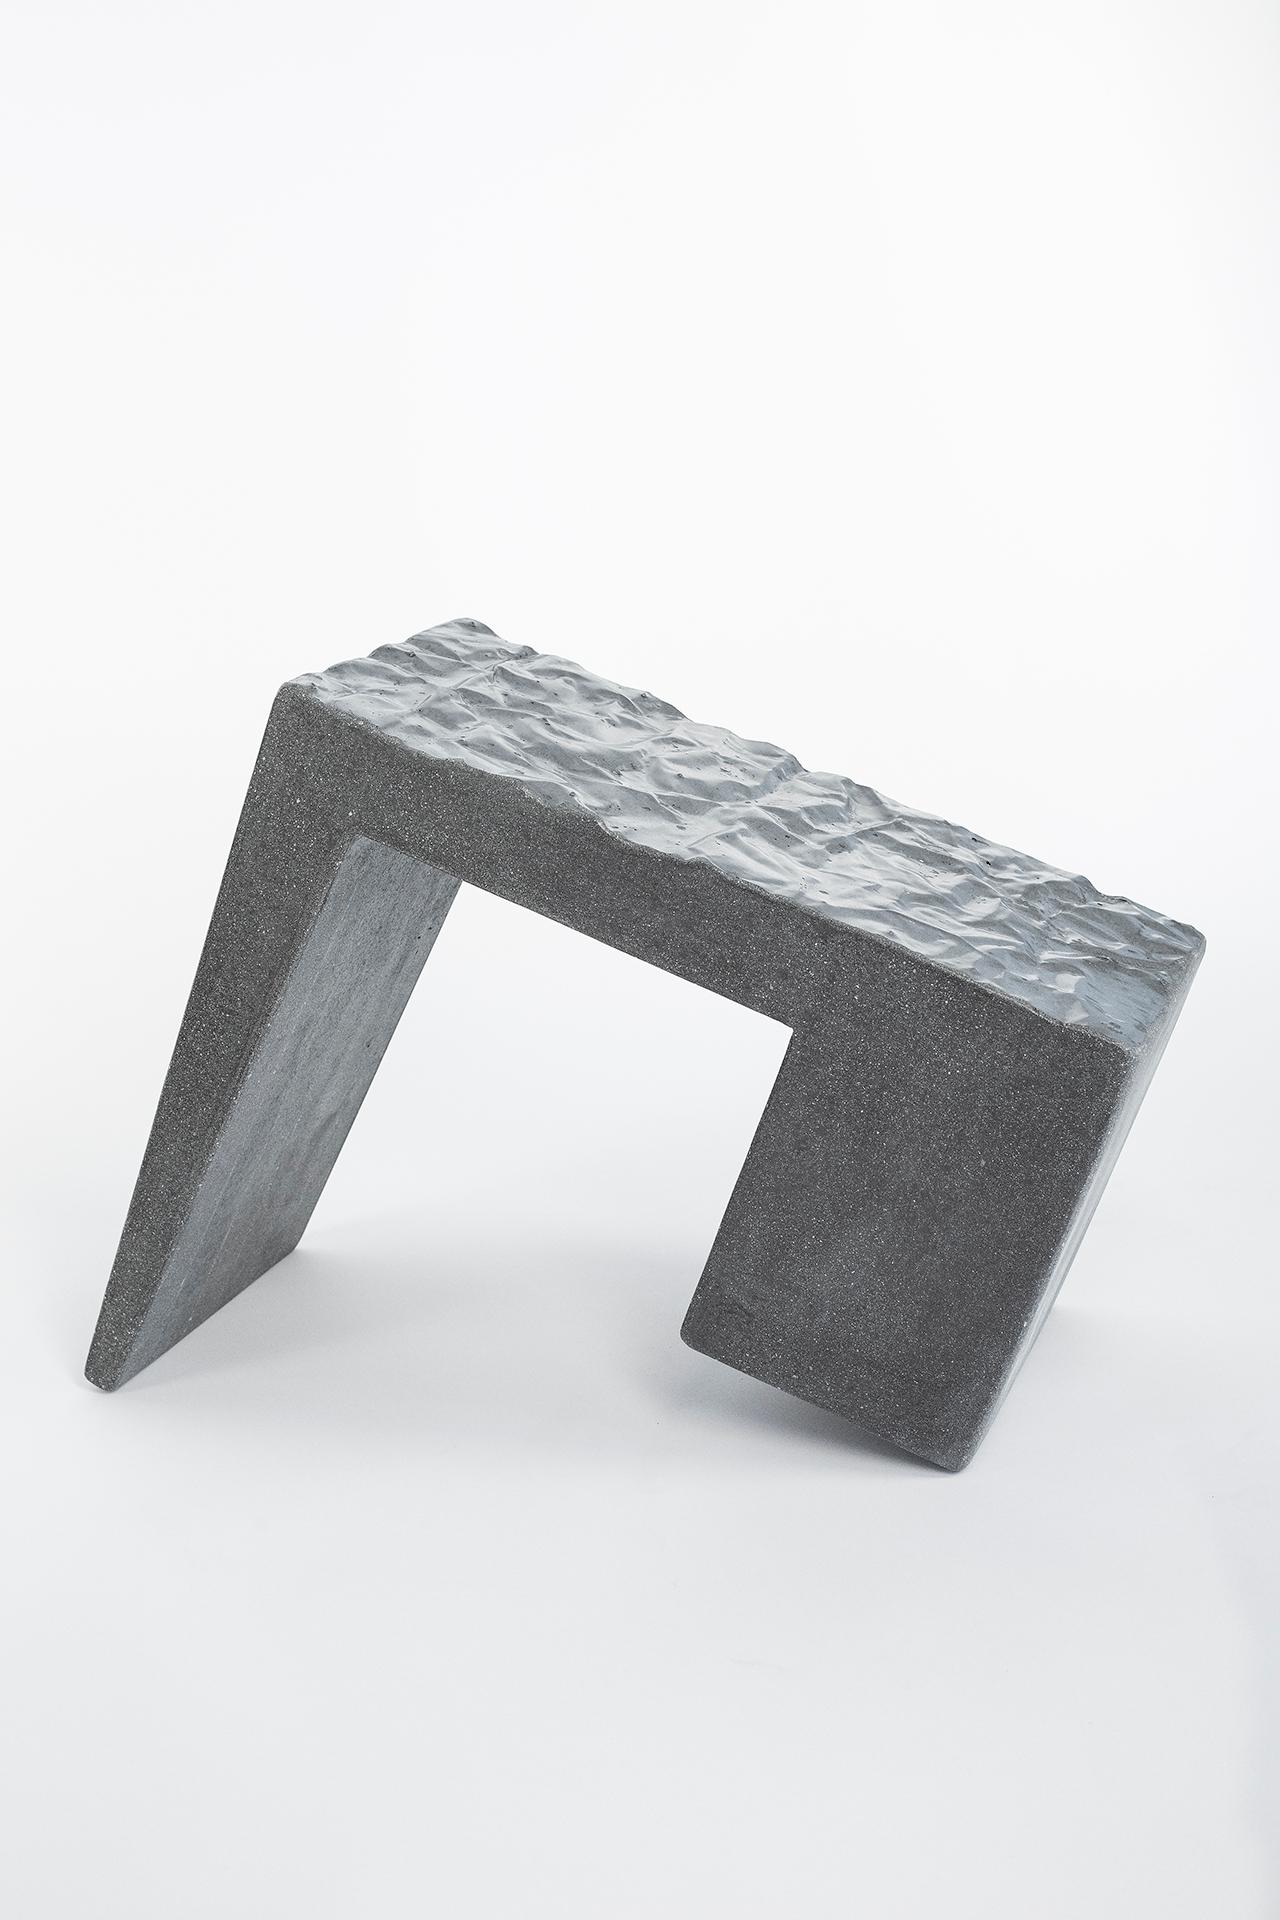 Hand-Crafted James de Wulf Concrete Crumple Side Table